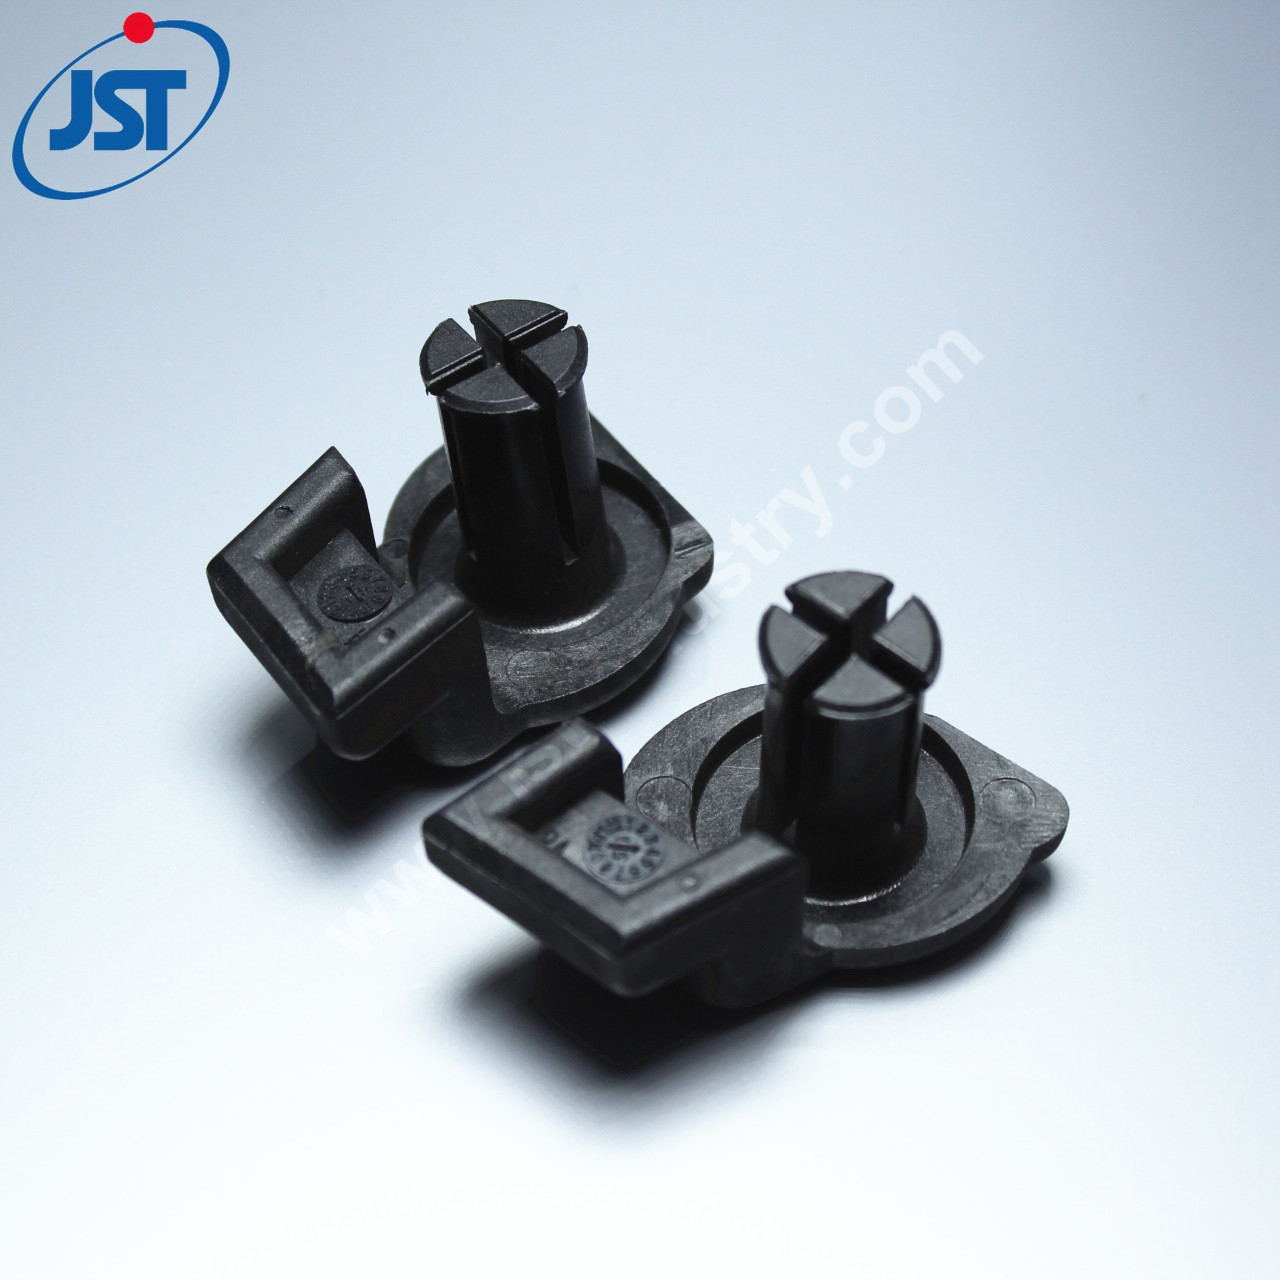 Customized Injection Molded Plastic Motorcycle Parts 